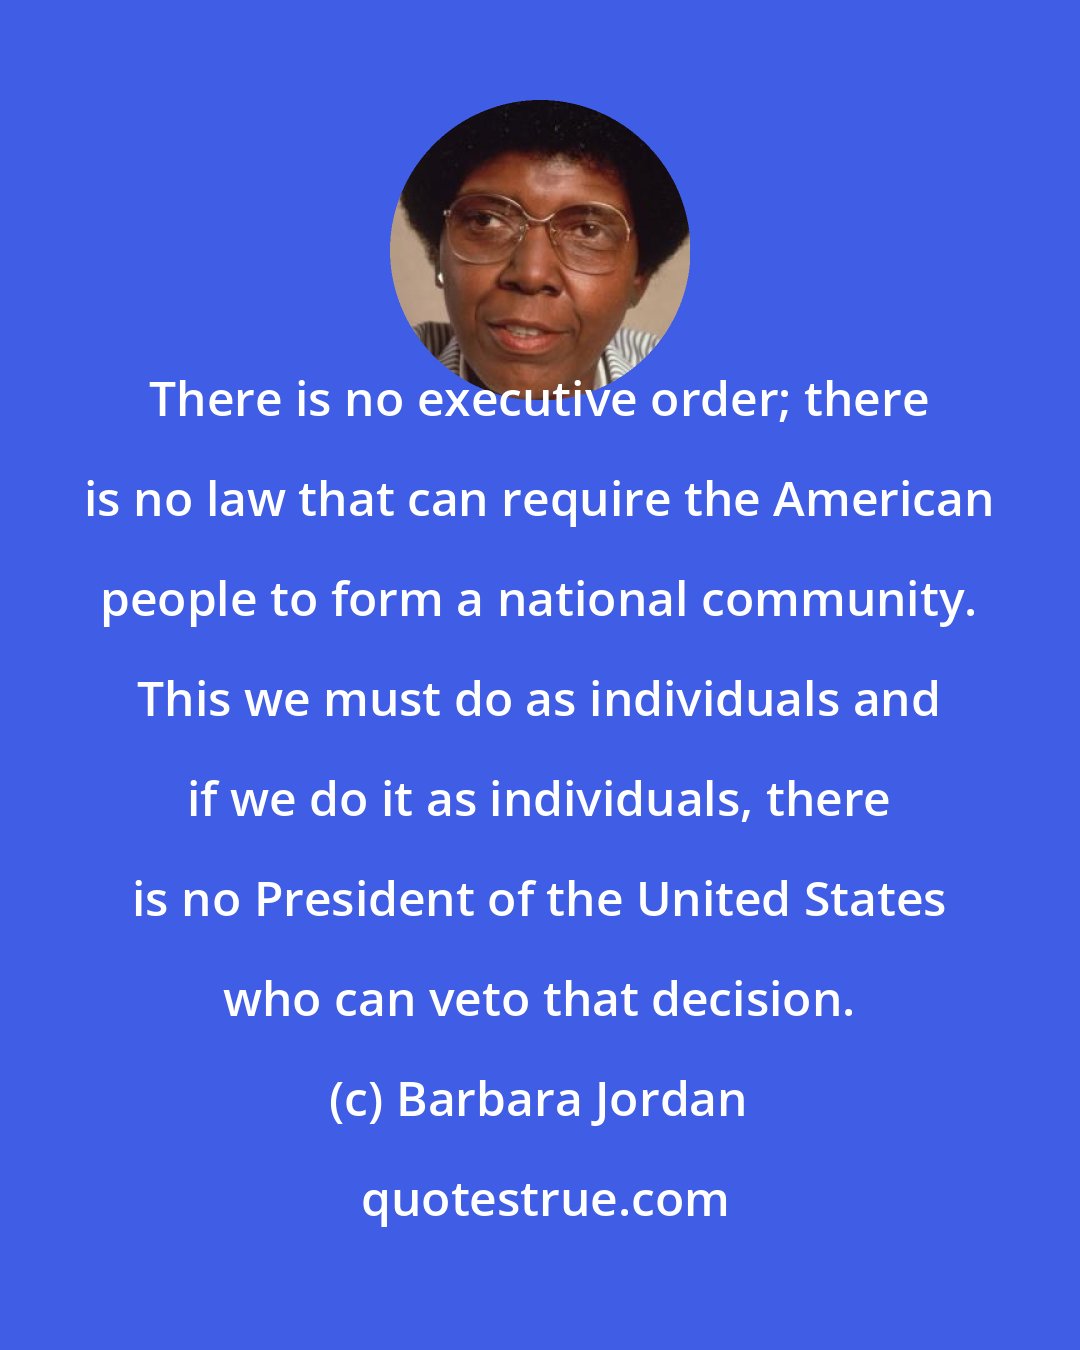 Barbara Jordan: There is no executive order; there is no law that can require the American people to form a national community. This we must do as individuals and if we do it as individuals, there is no President of the United States who can veto that decision.